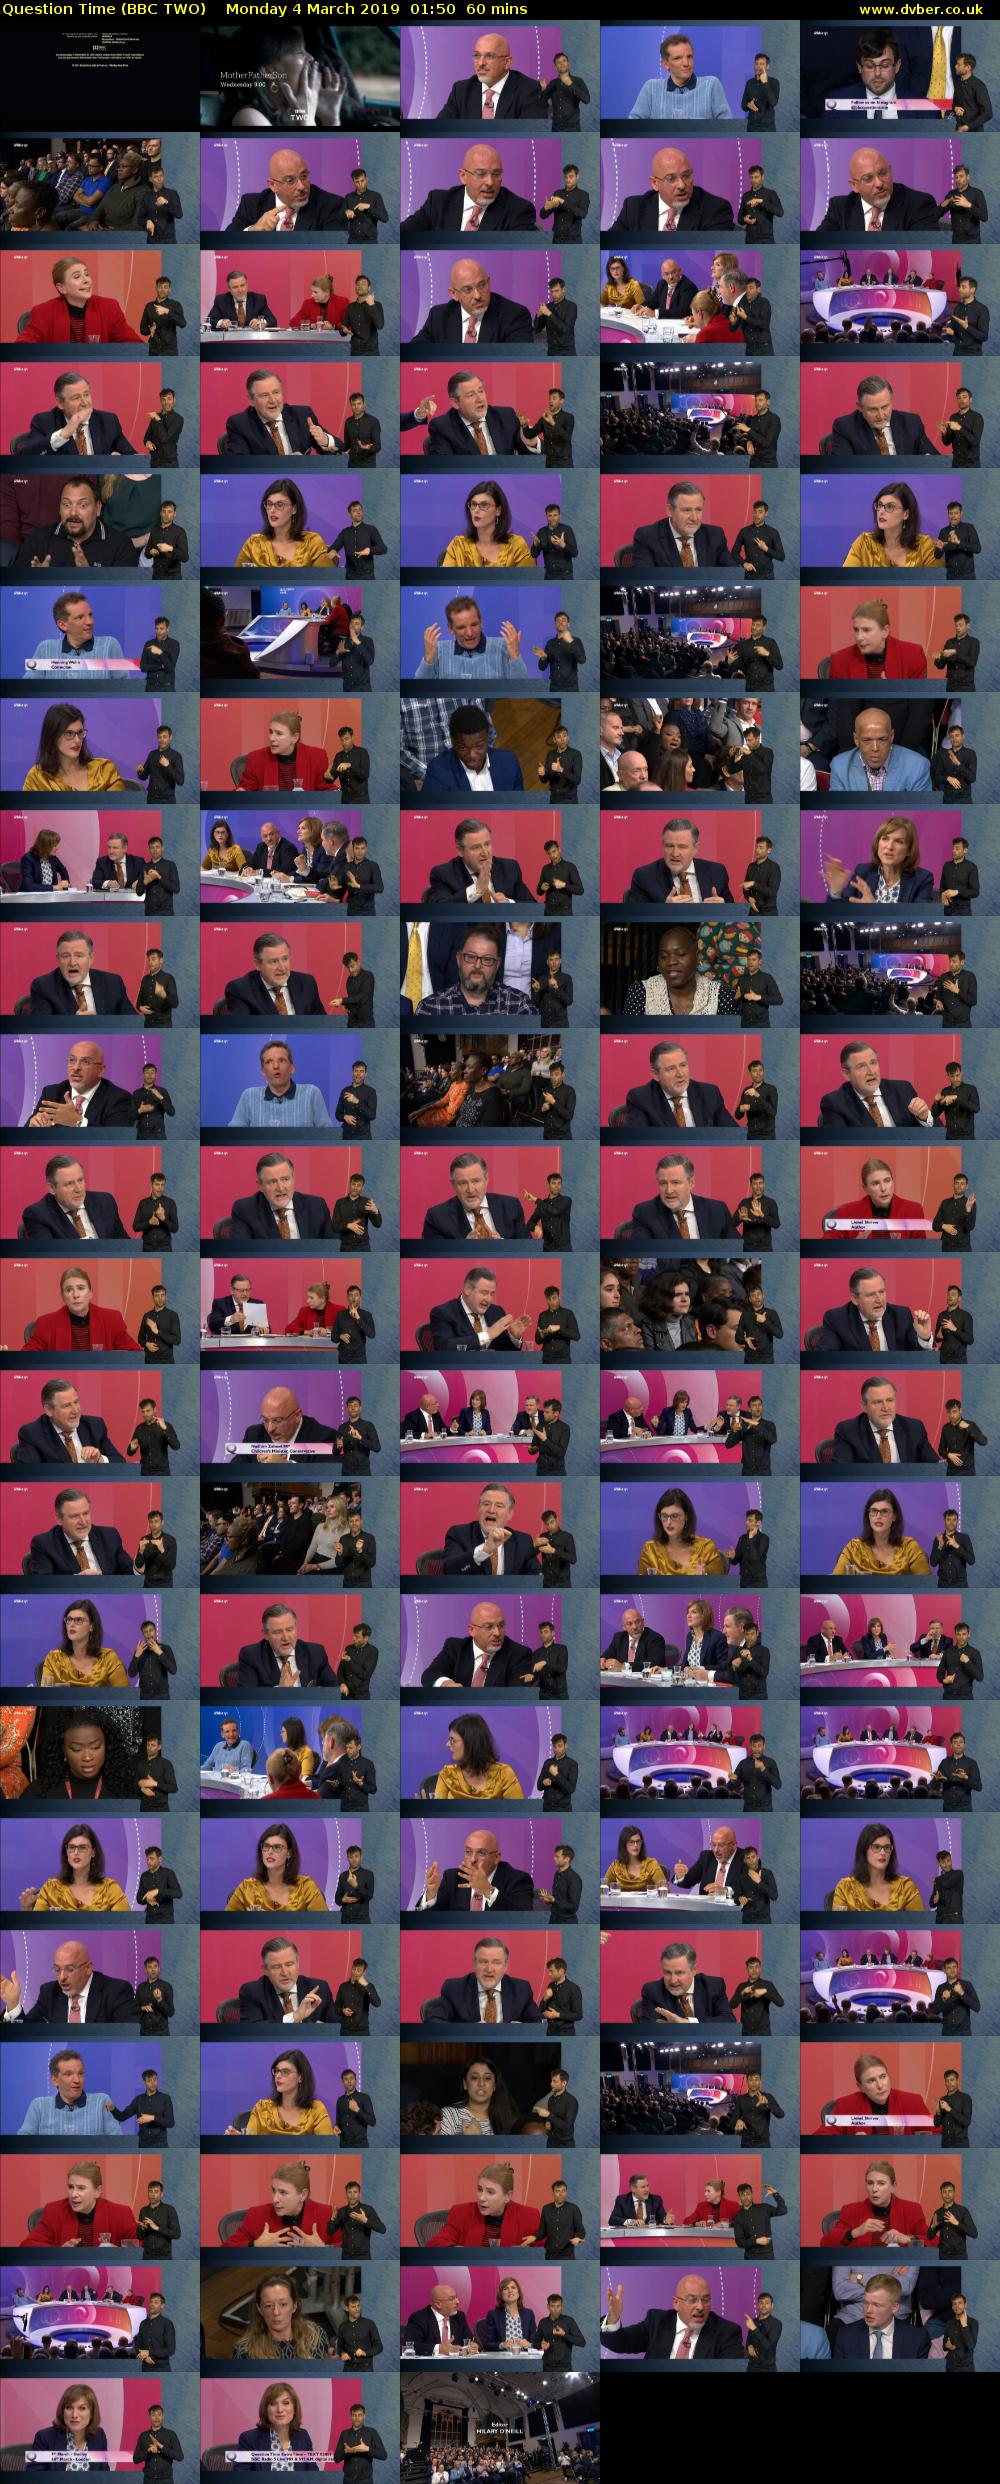 Question Time (BBC TWO) Monday 4 March 2019 01:50 - 02:50